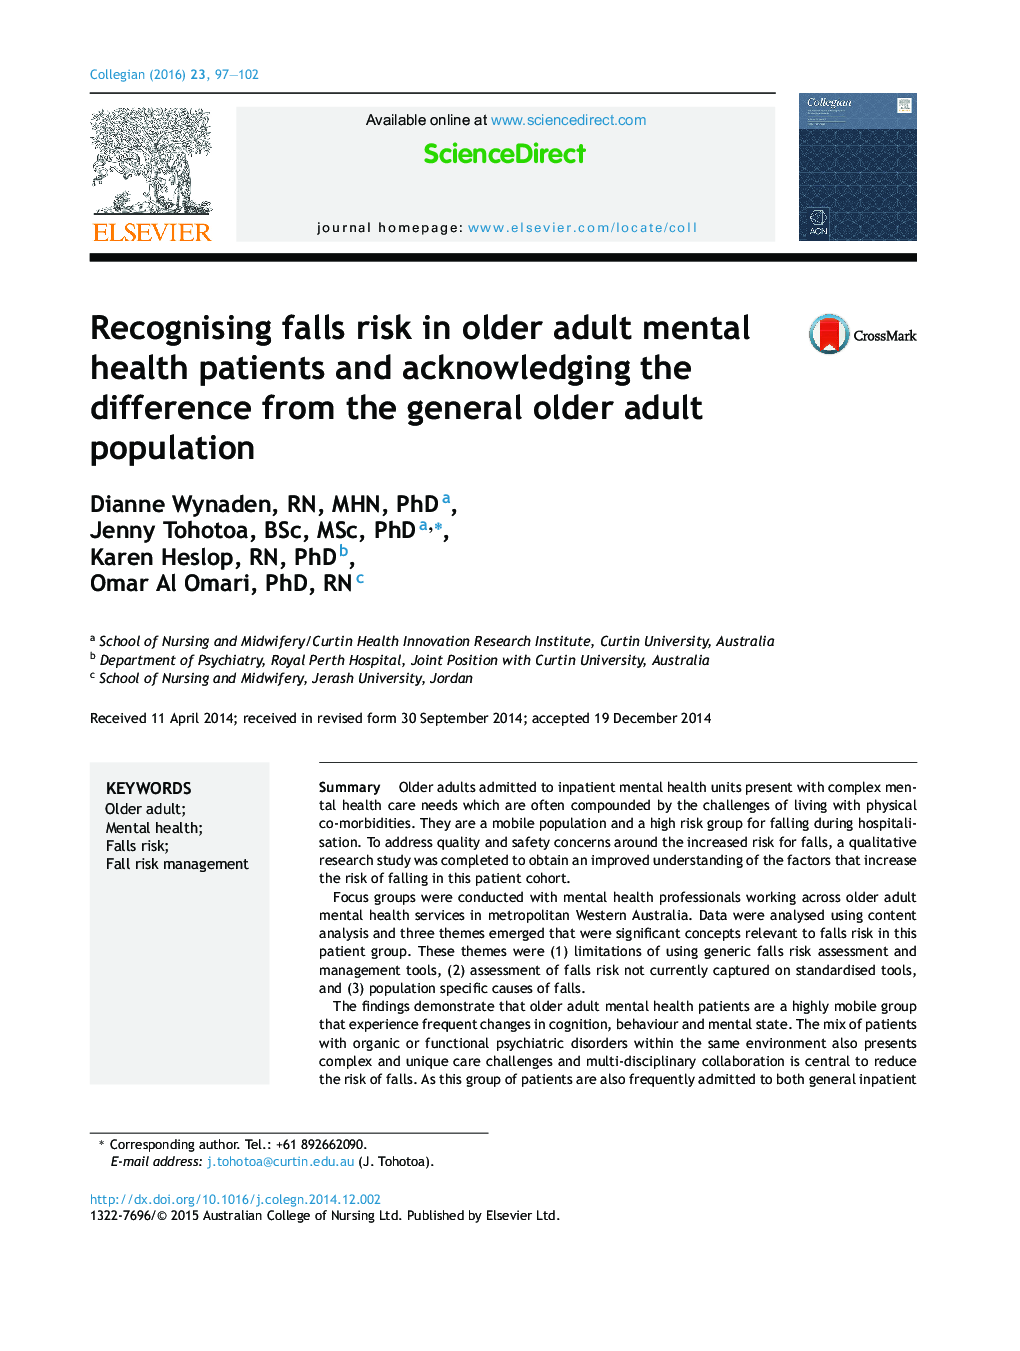 Recognising falls risk in older adult mental health patients and acknowledging the difference from the general older adult population